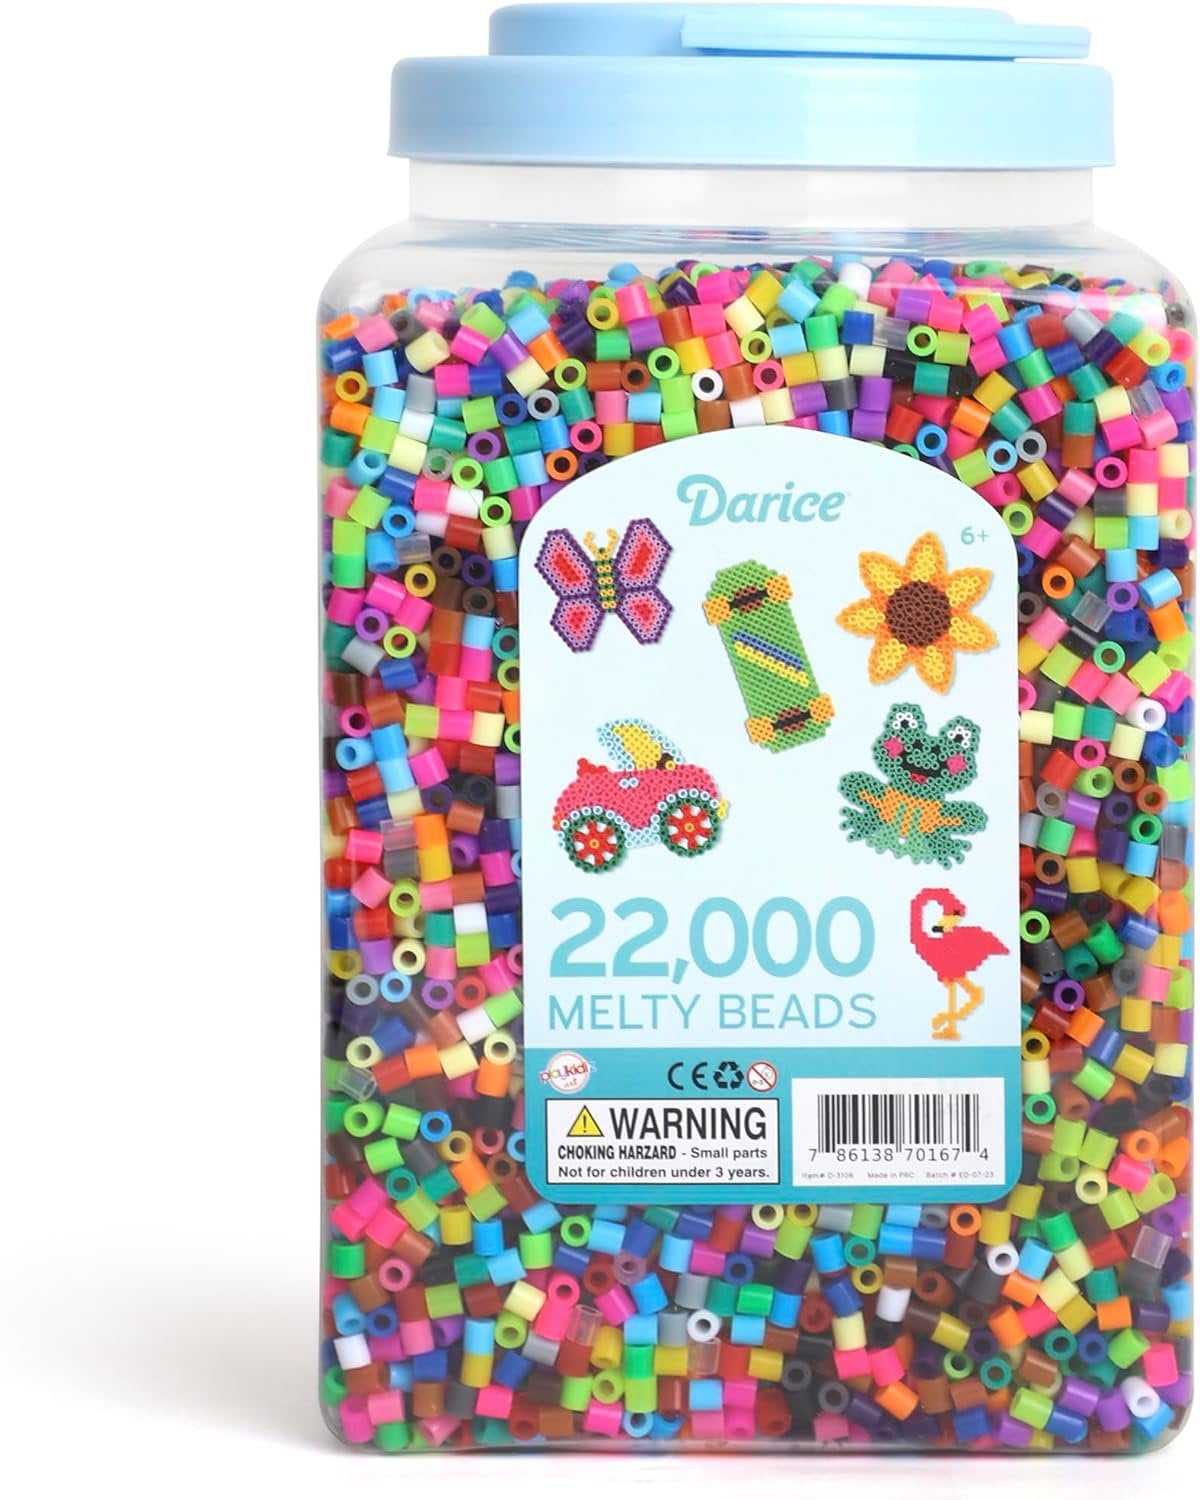 Safely Designed Wholesale Perler Beads For Fun And Learning